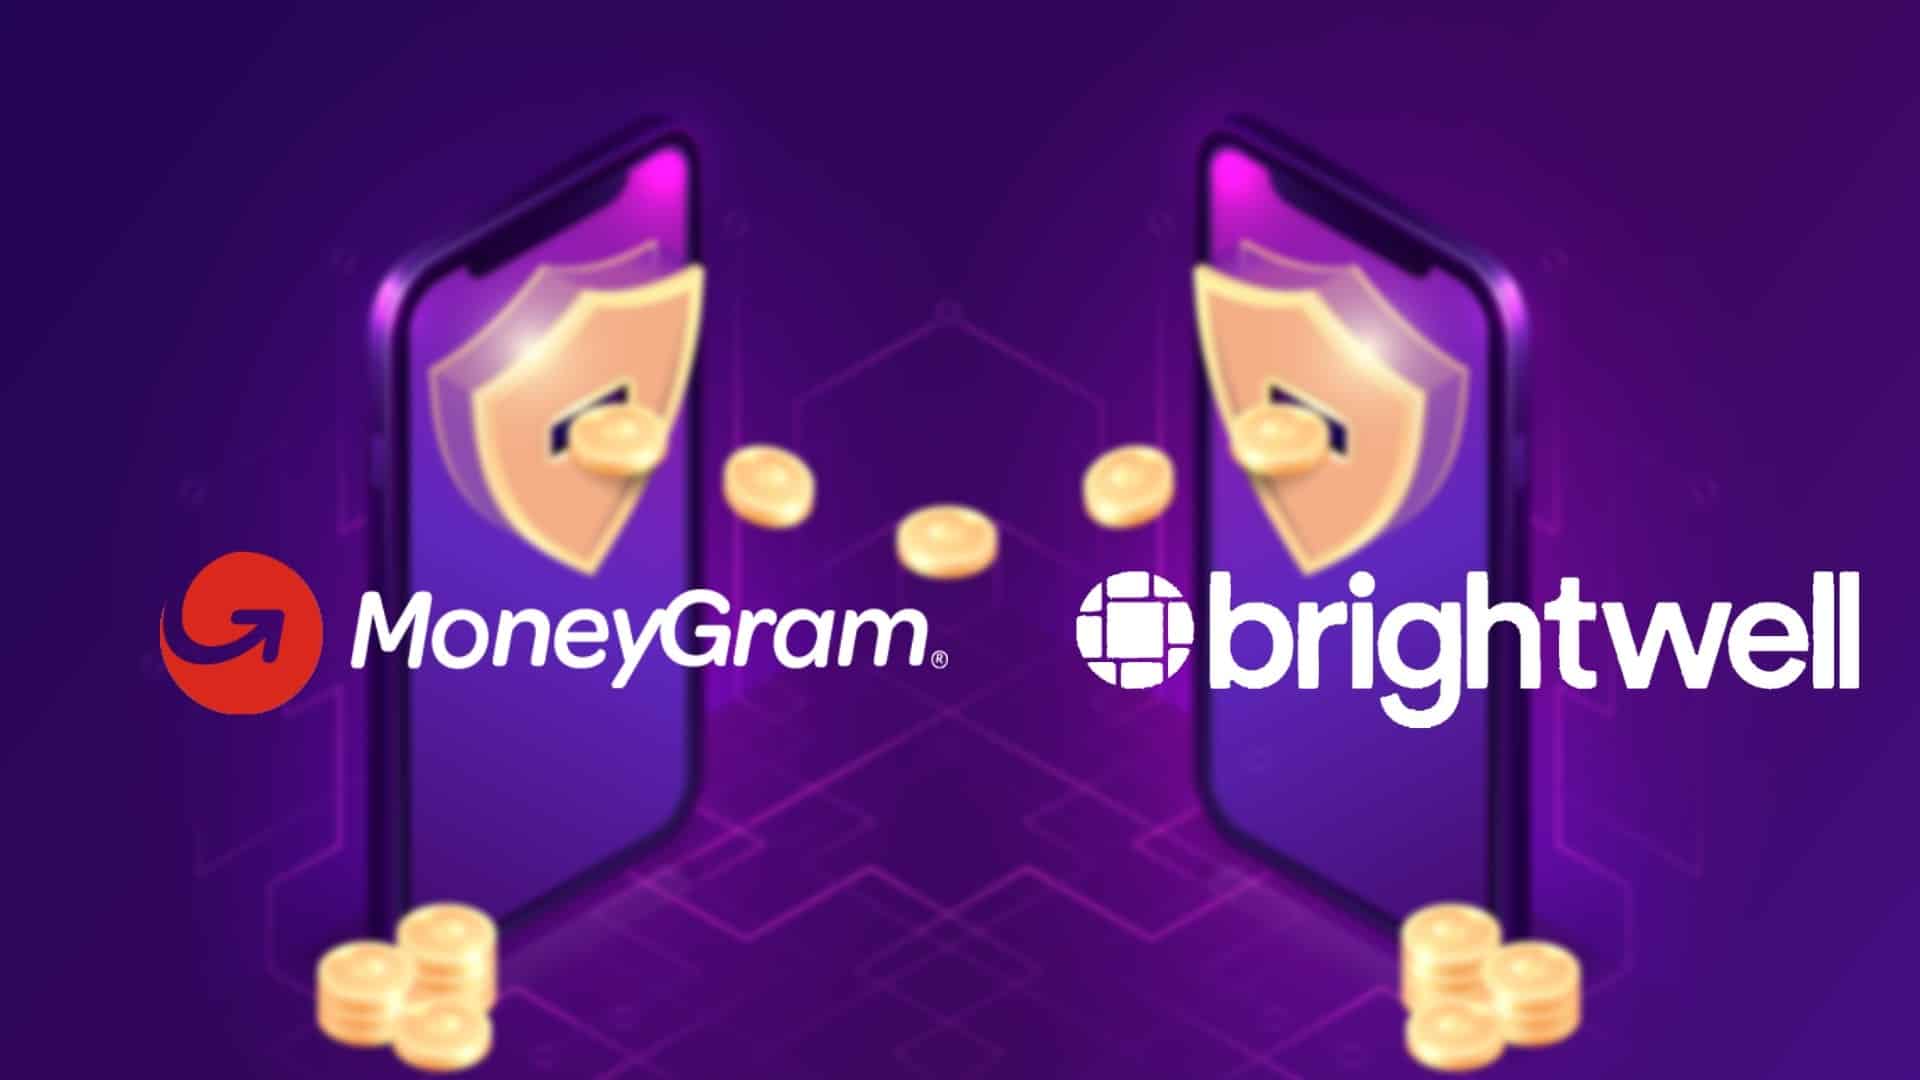 MoneyGram forms alliance with Brightwell for simplifying money transfers